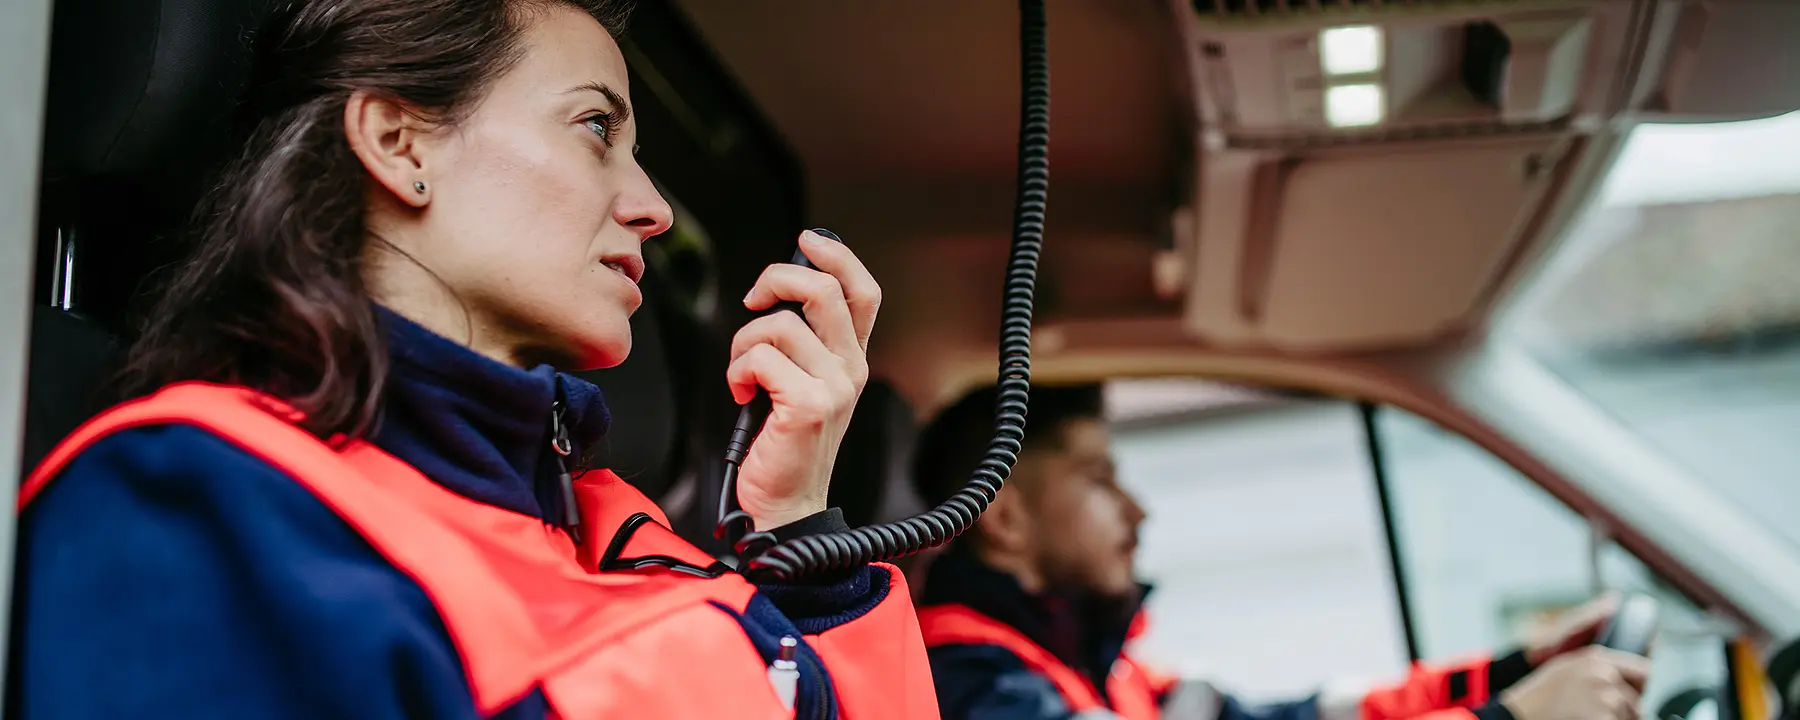 A female first responder talks on a handheld radio as her colleague drives the ambulance.